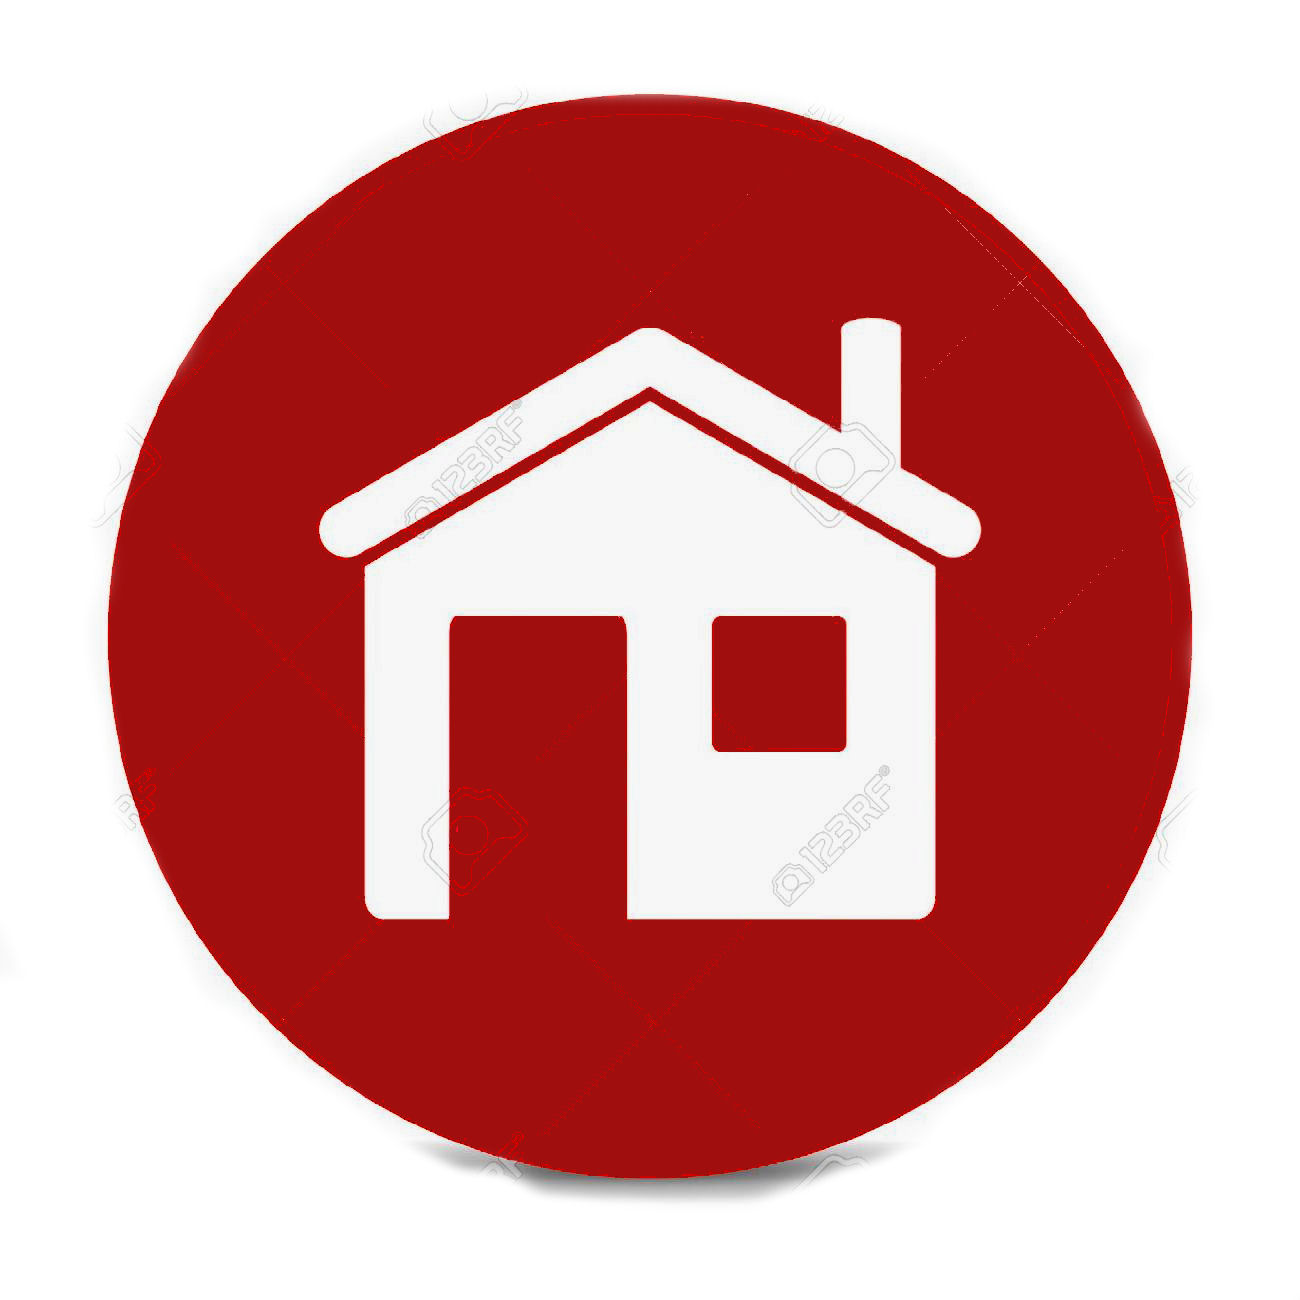 19252592 Home Red Circle Web Glossy Icon Stock Photo Logro